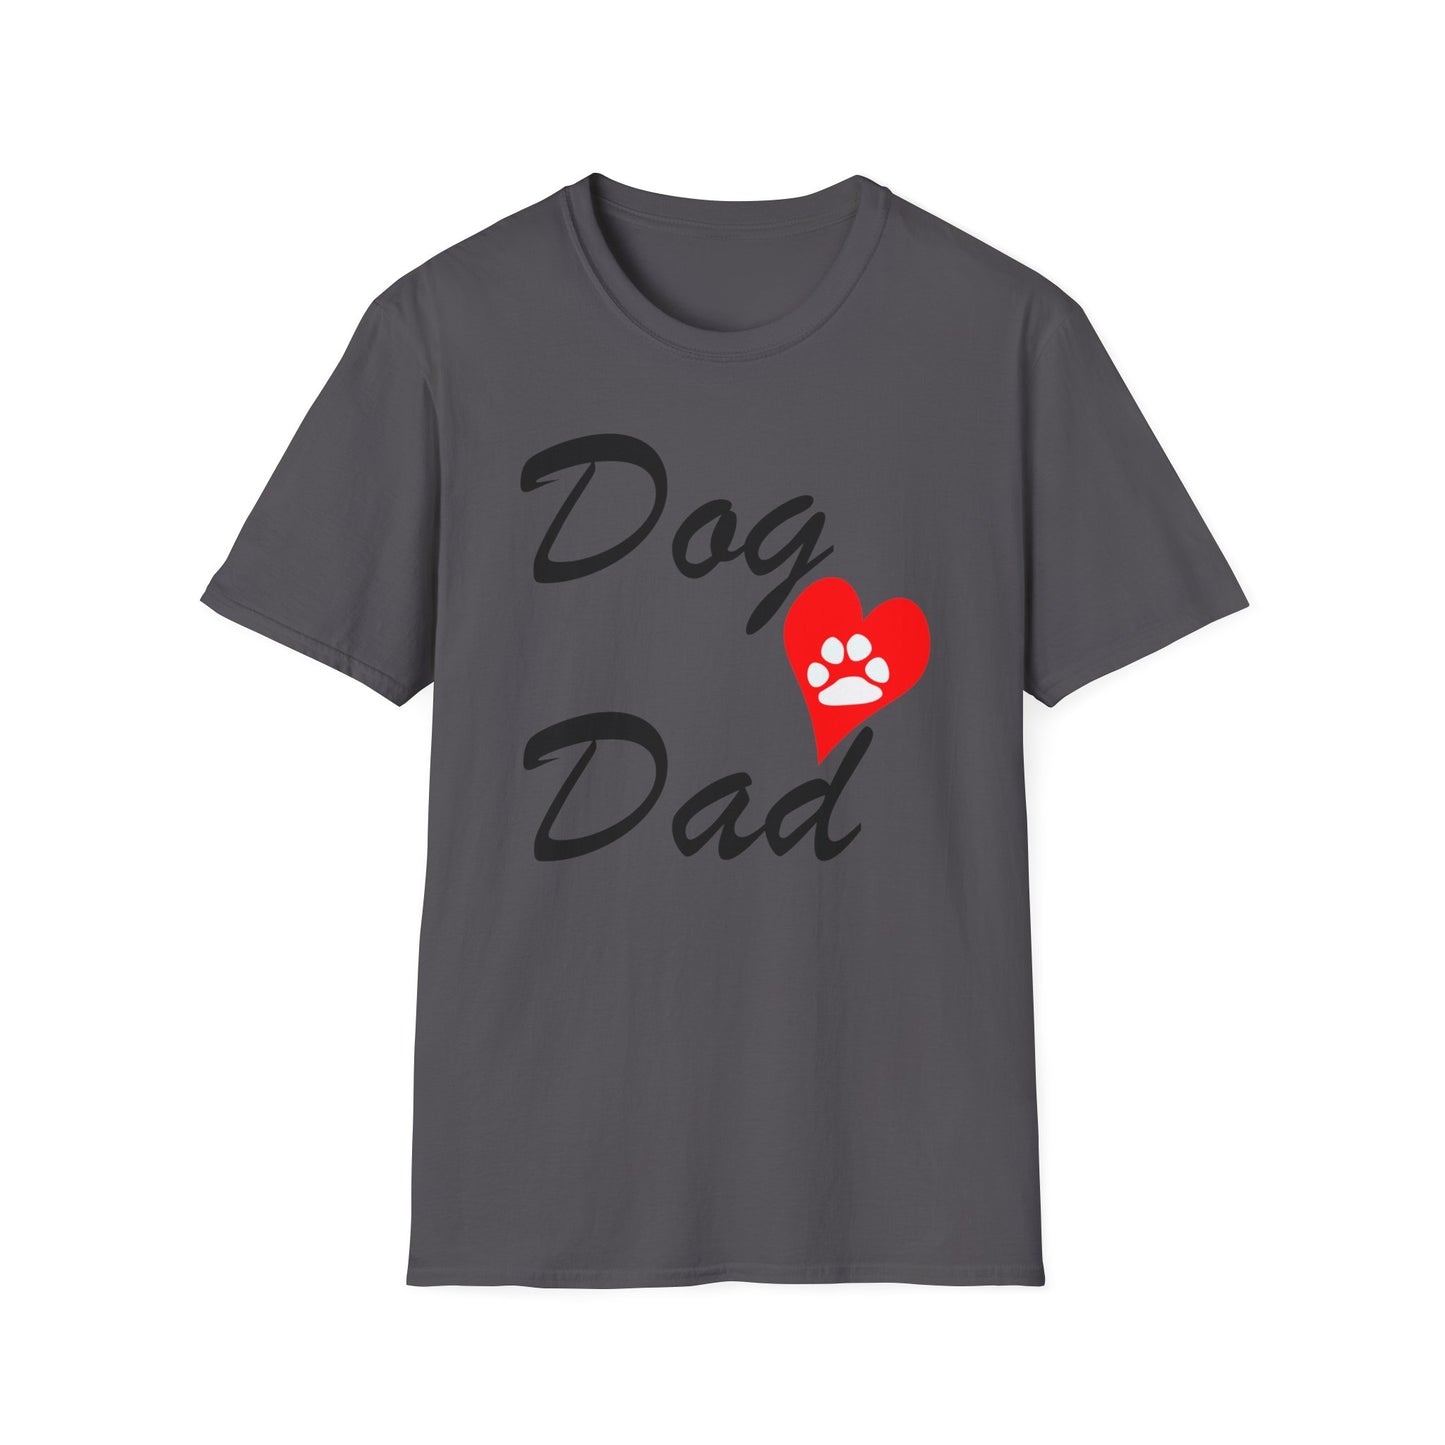 Dog Dad Father's Day T-Shirt